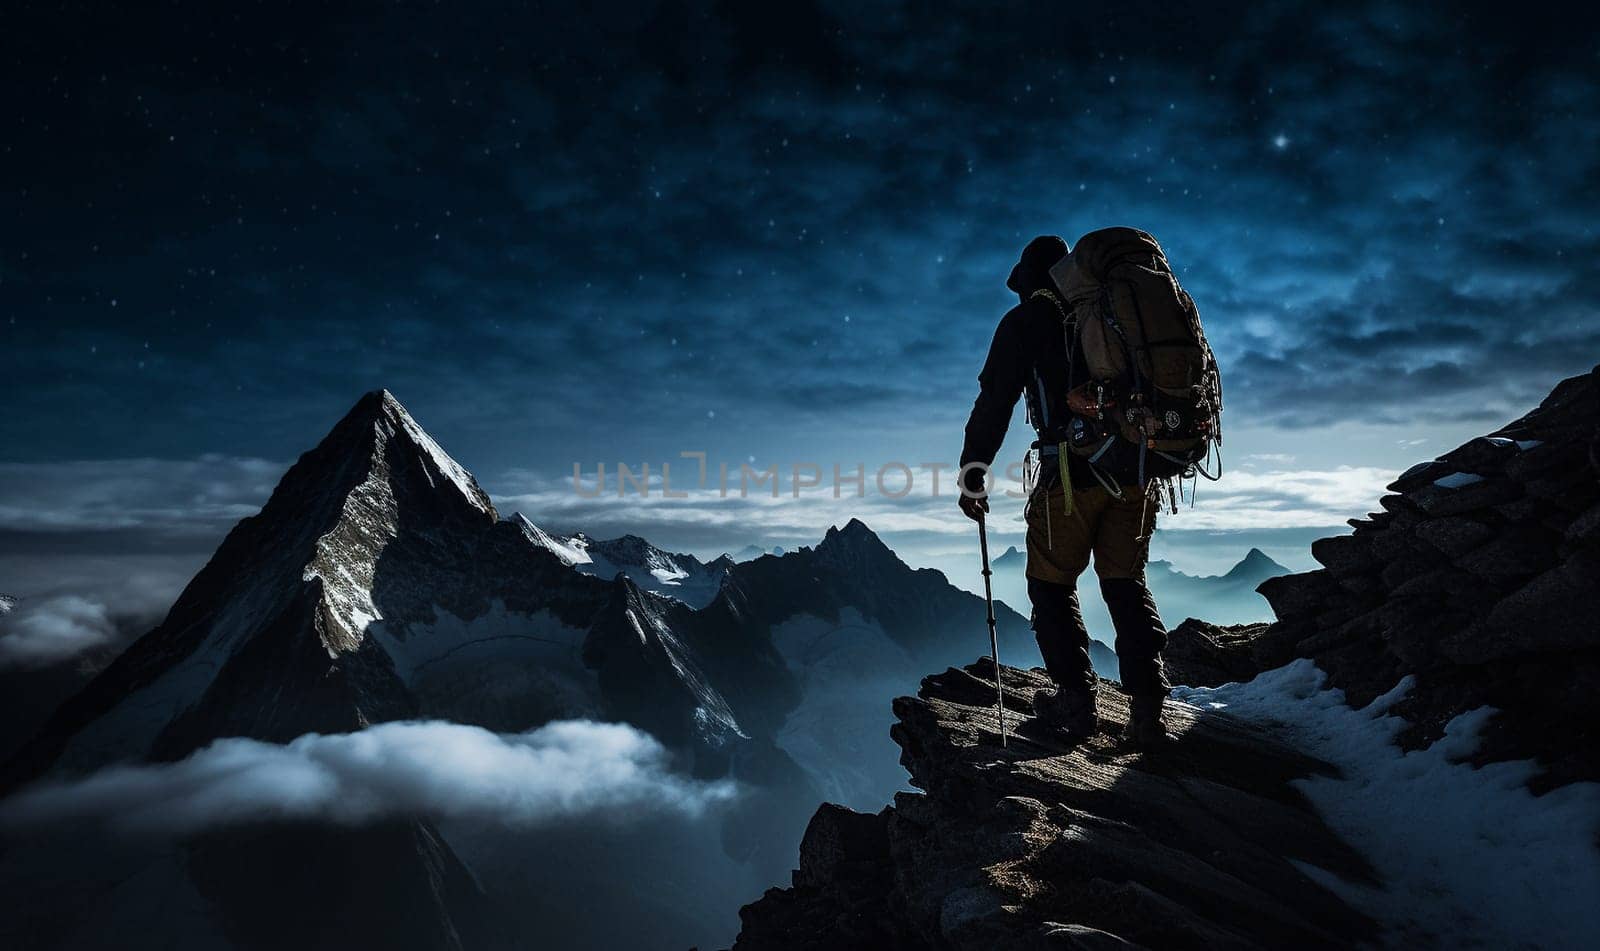 Hikers climber walking in the mountains by night, mountaineers trekking in the cold night. Team of hiker climbers with beautiful galaxy starry sky by Annebel146